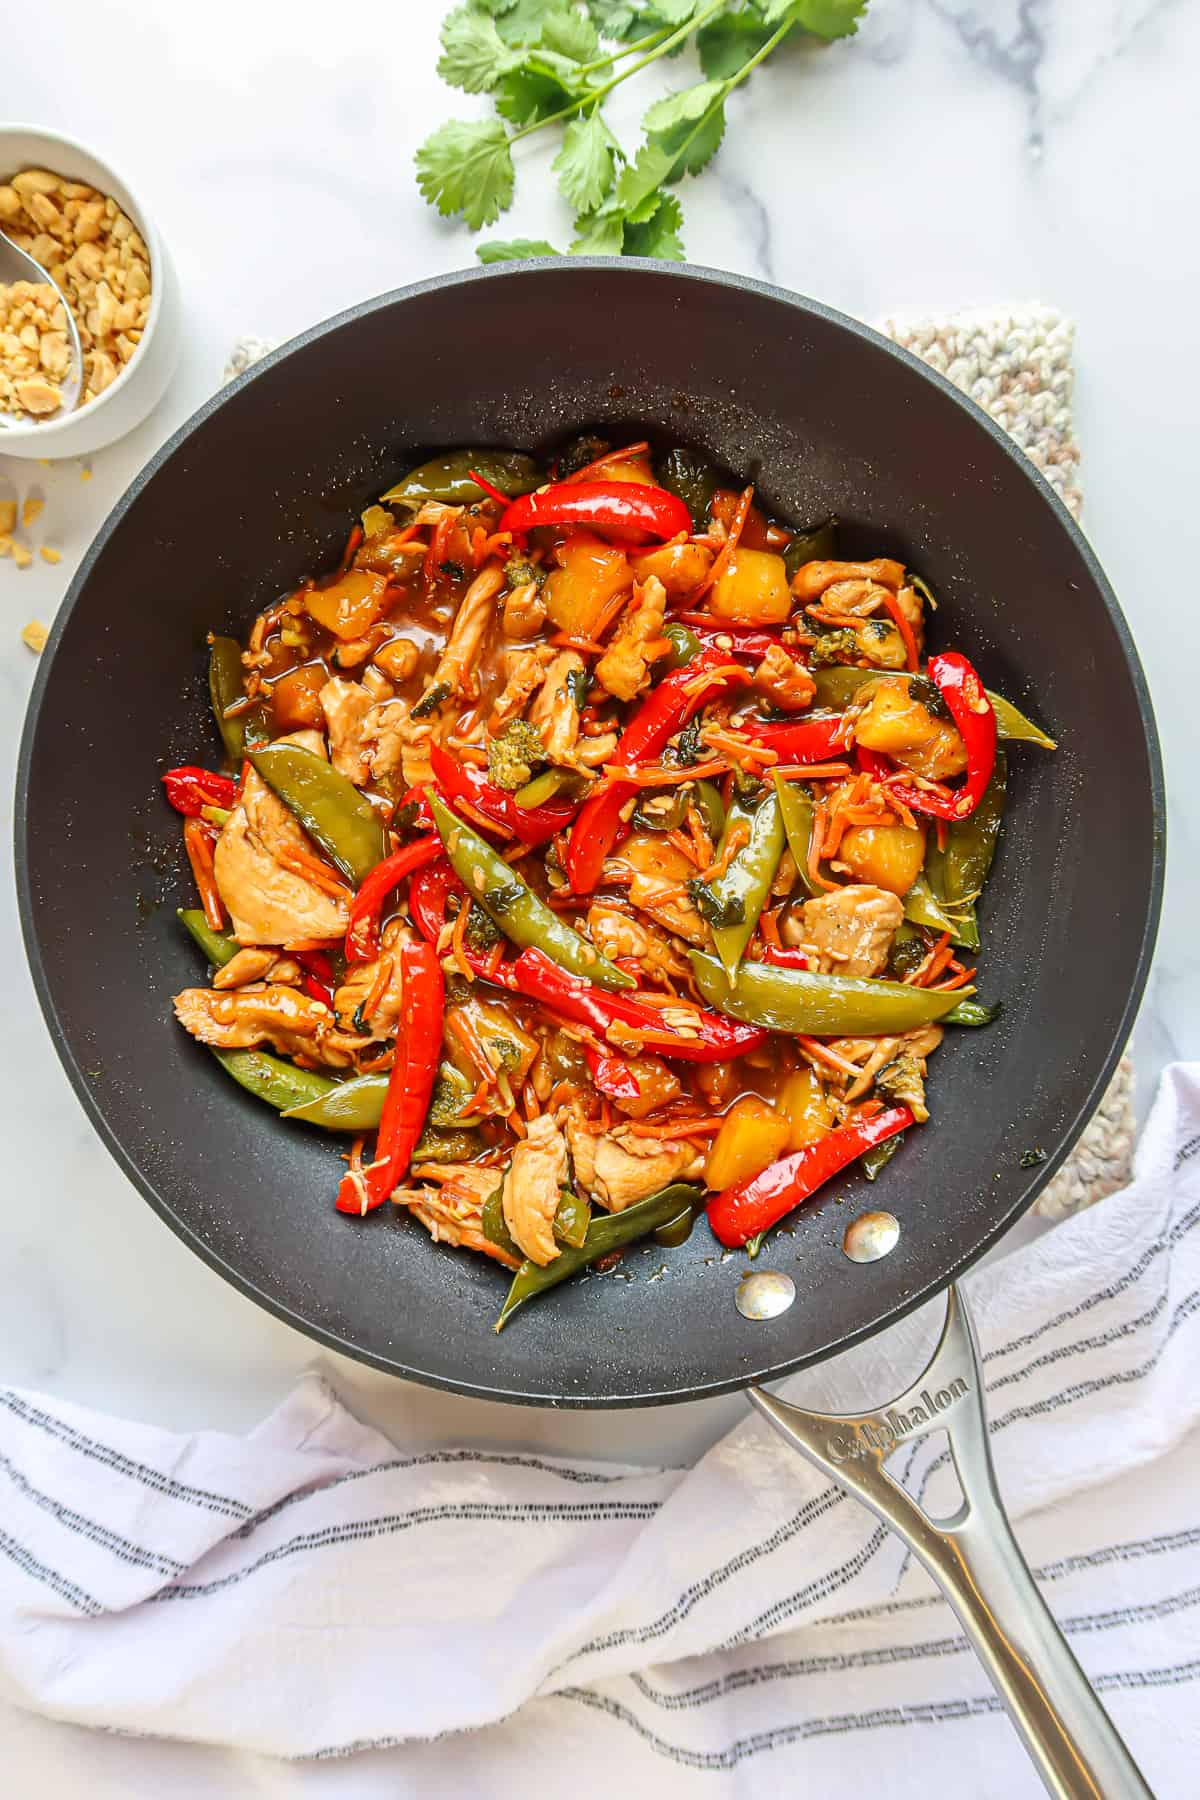 Sweet and spicy chicken stir fry in a black wok.